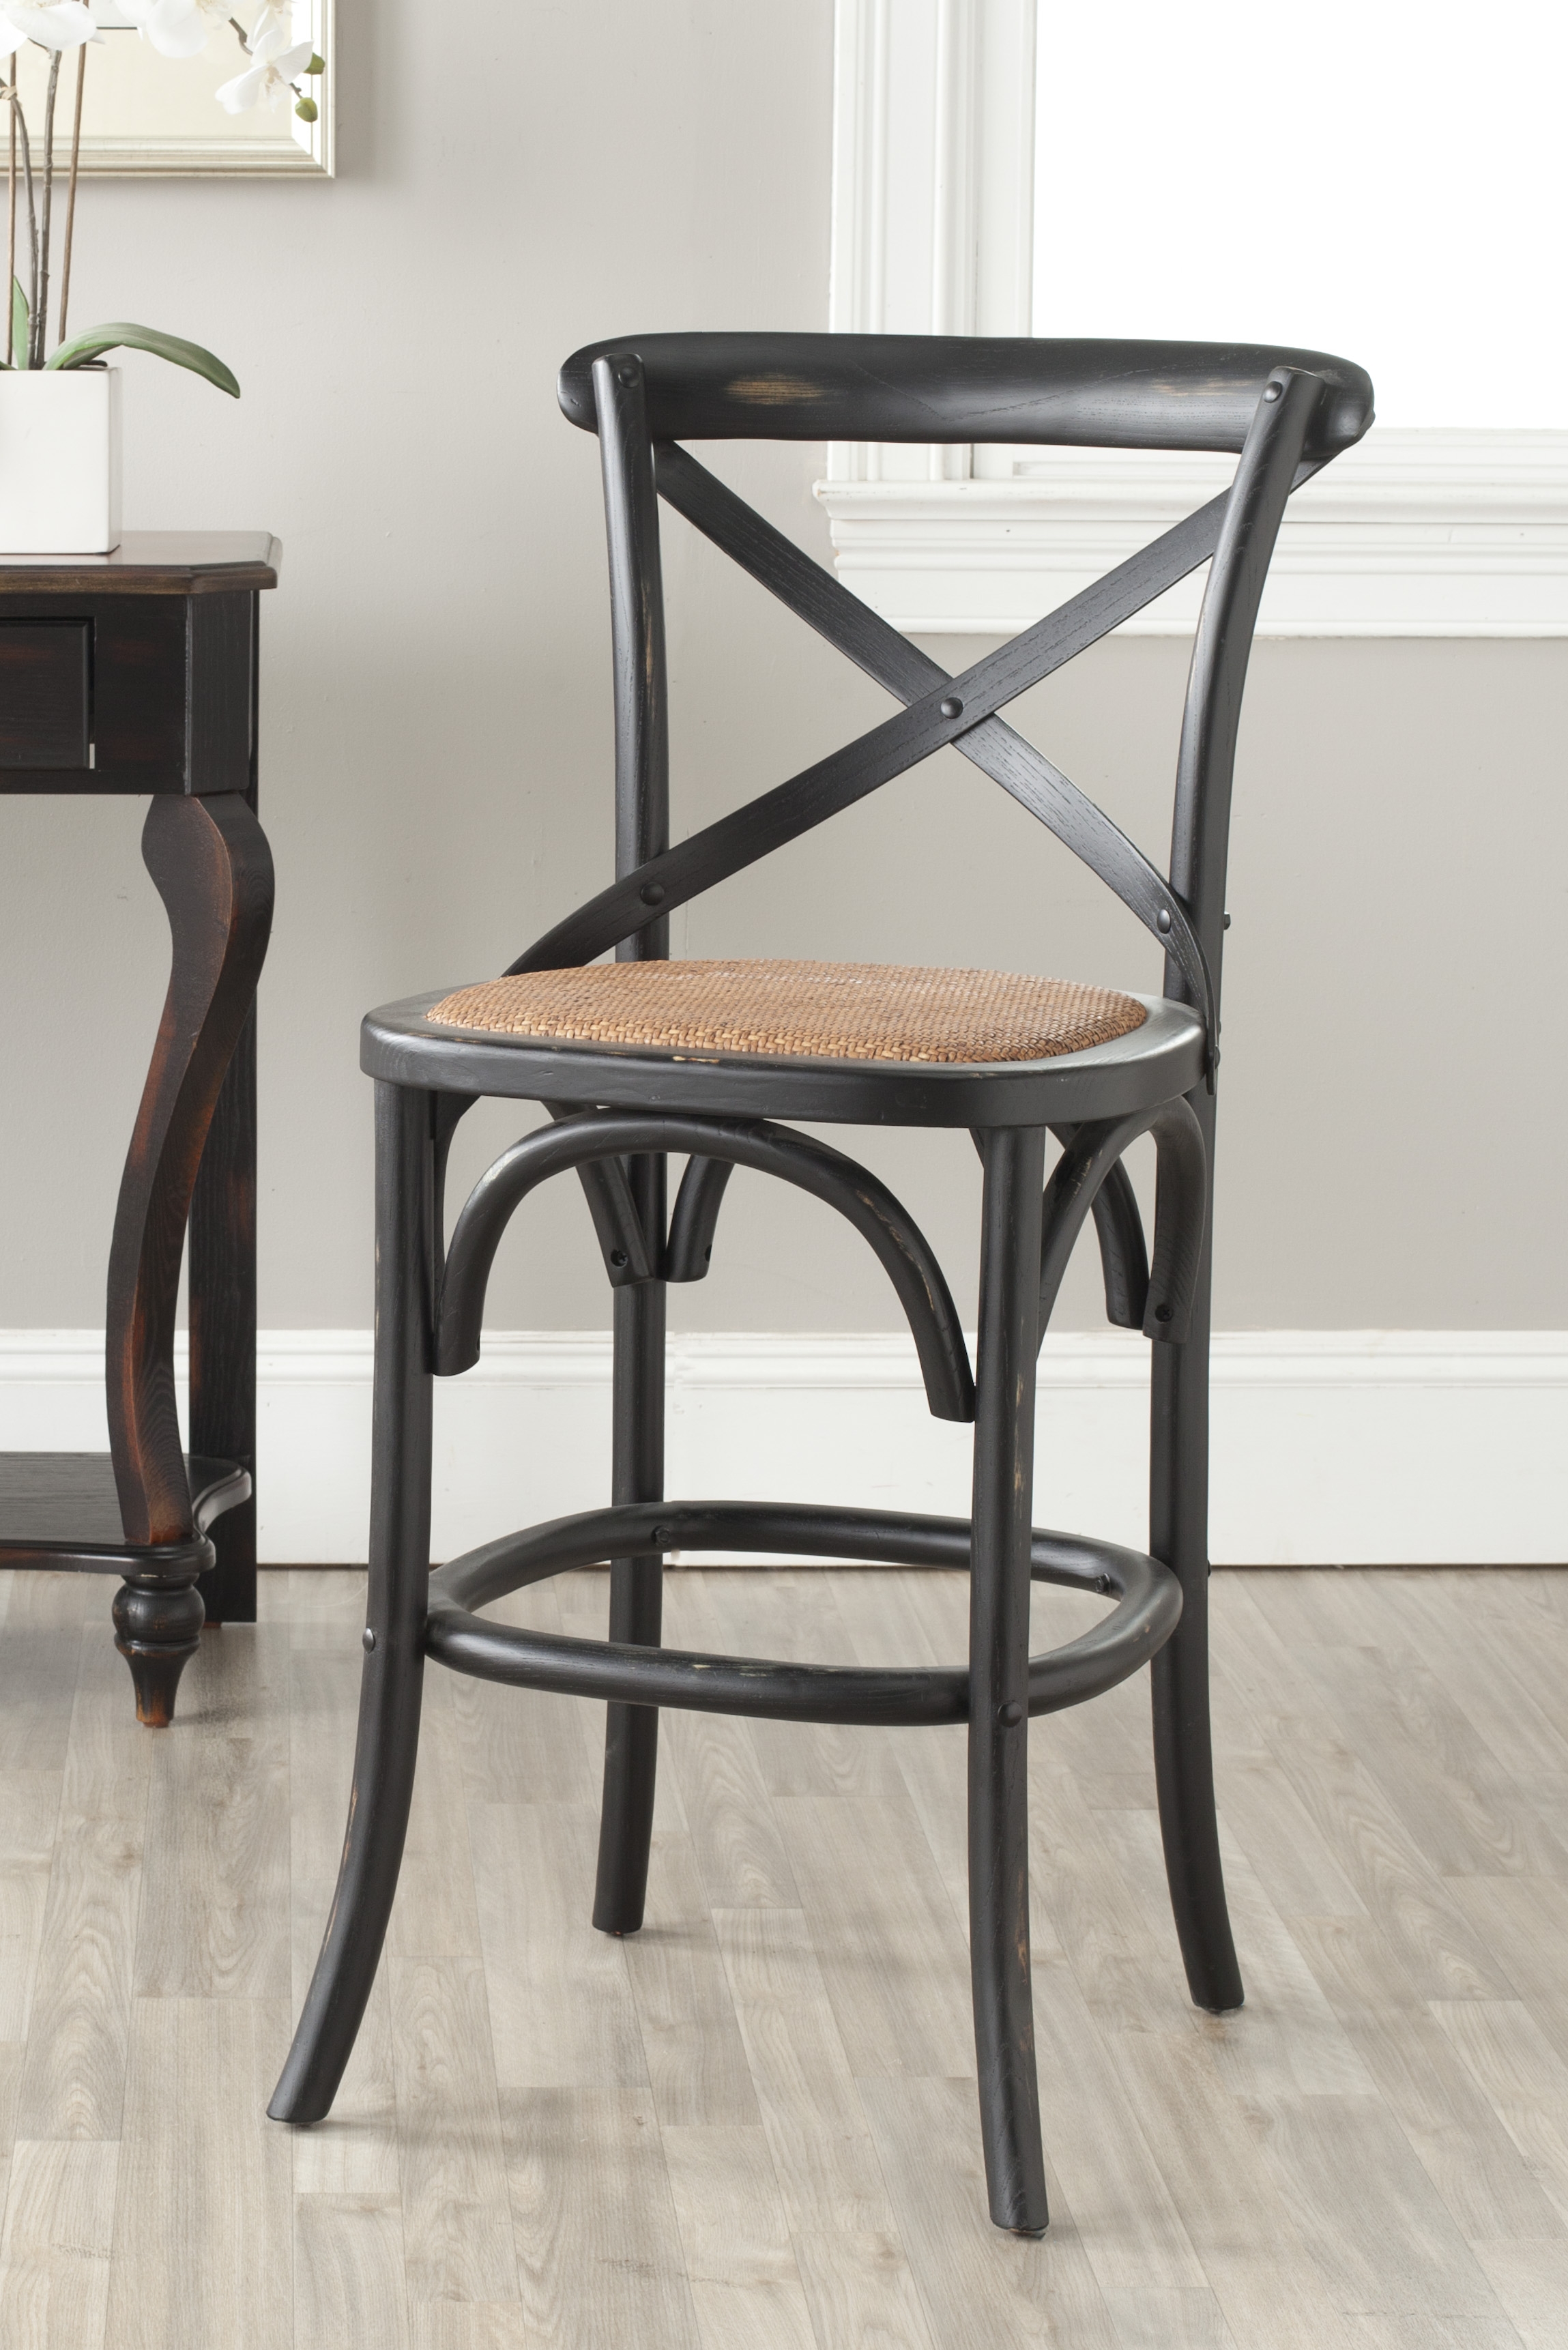 Franklin X Back Counter Stool - Distressed Hickory/Medium Brown - Arlo Home - Image 2